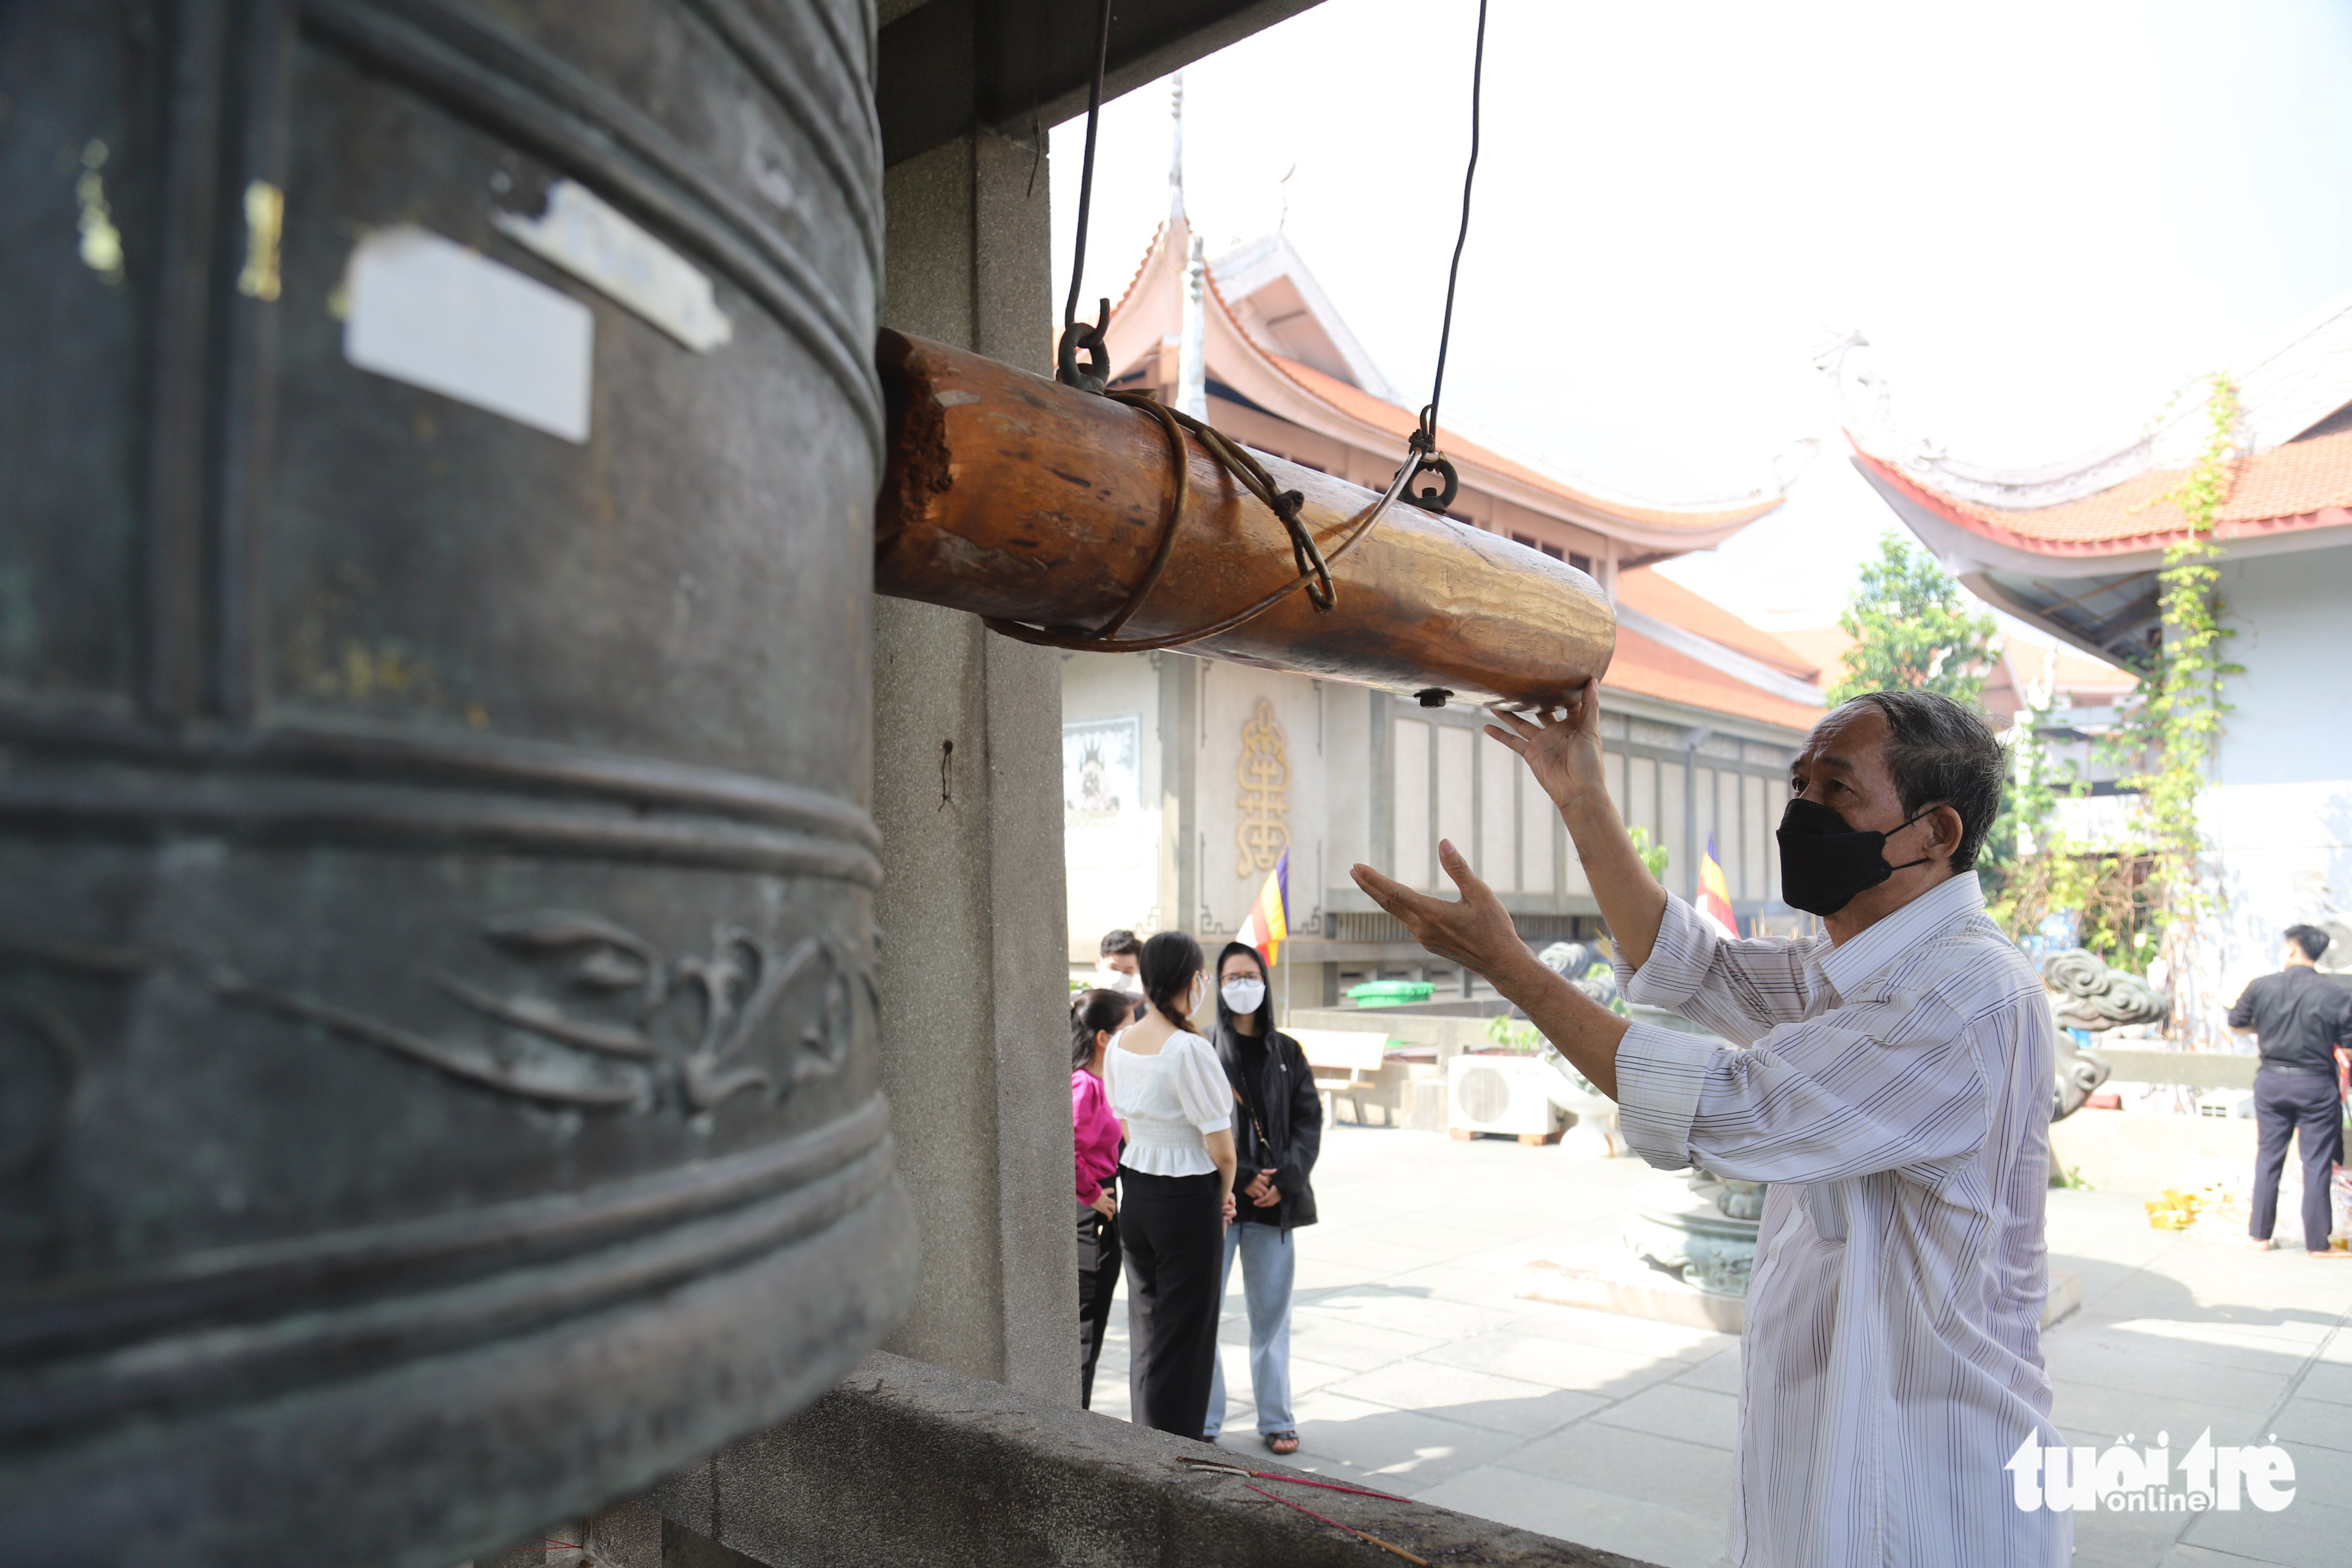 A man rings a bell to pray for peace and safety at Vinh Nghiem Pagoda in District 3, Ho Chi Minh City, May 15, 2022. Photo: Nguyen Khang / Tuoi Tre